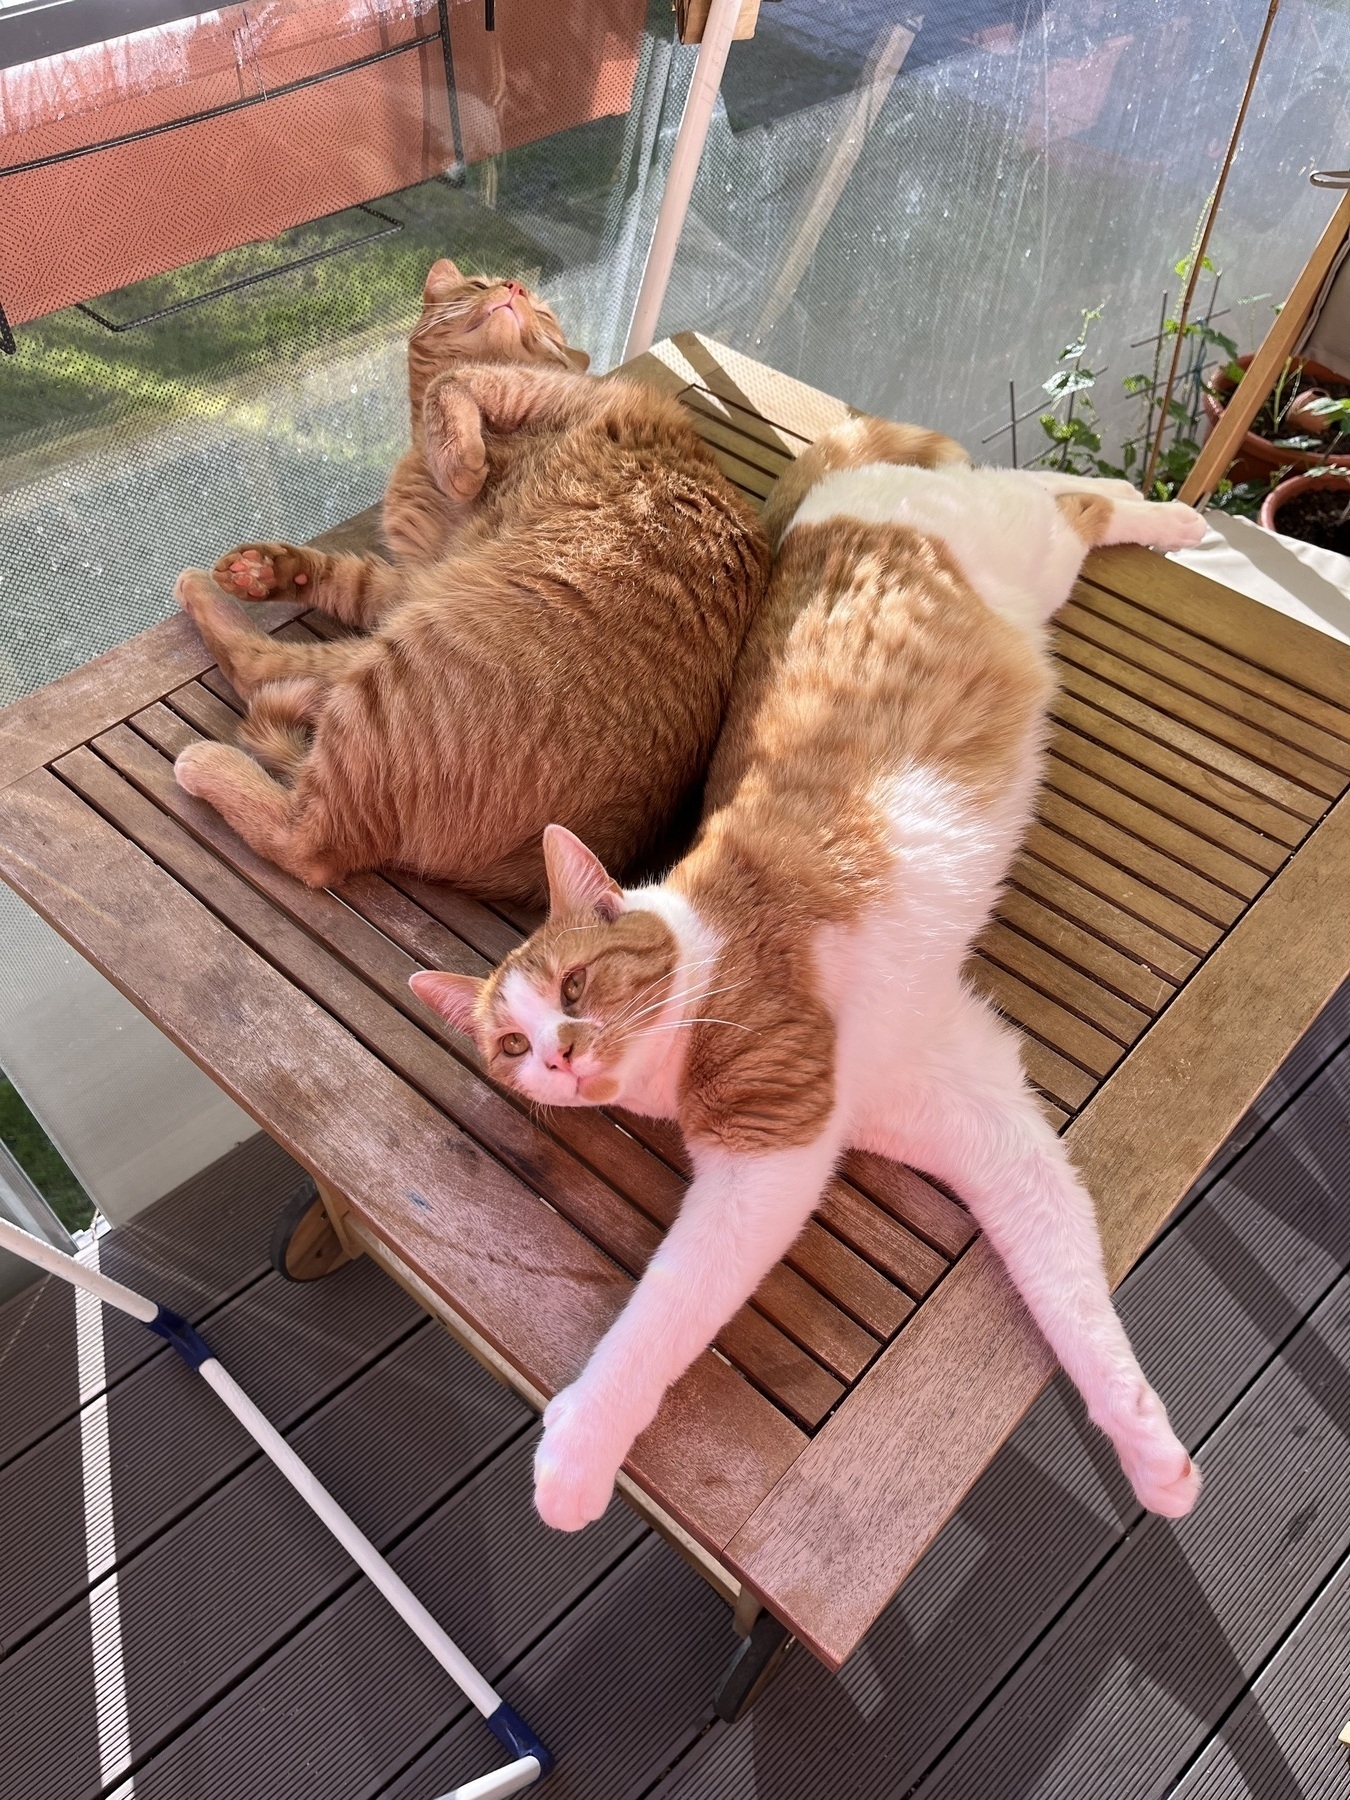 Two cats on a table